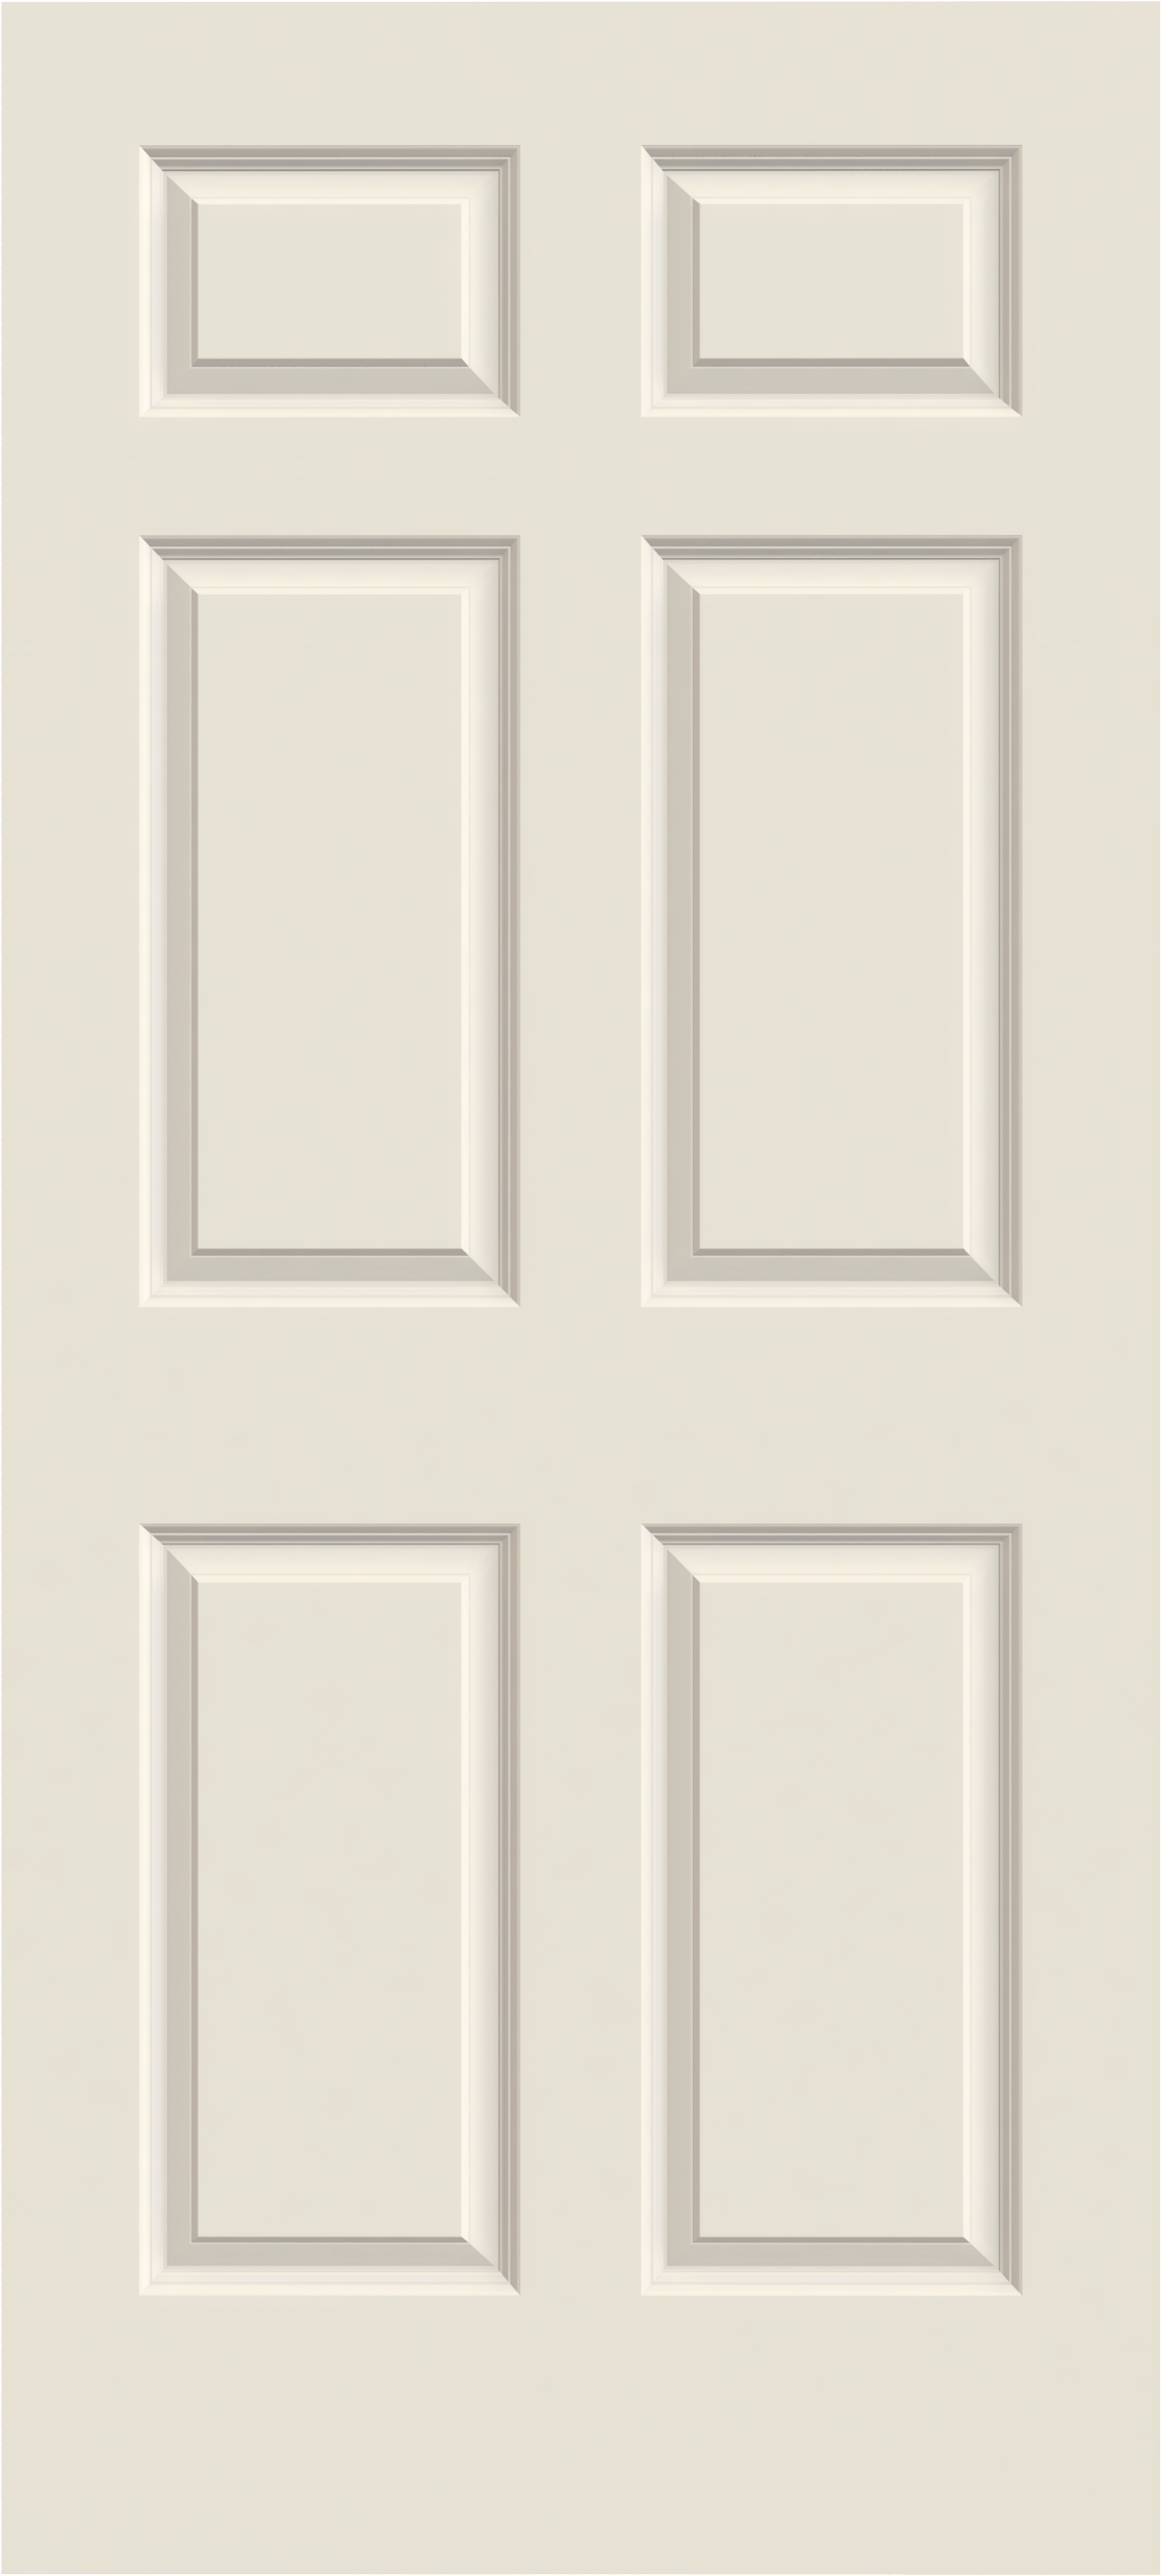 Raised-panel door for home’s interior features a classic six-panel design and a smooth surface